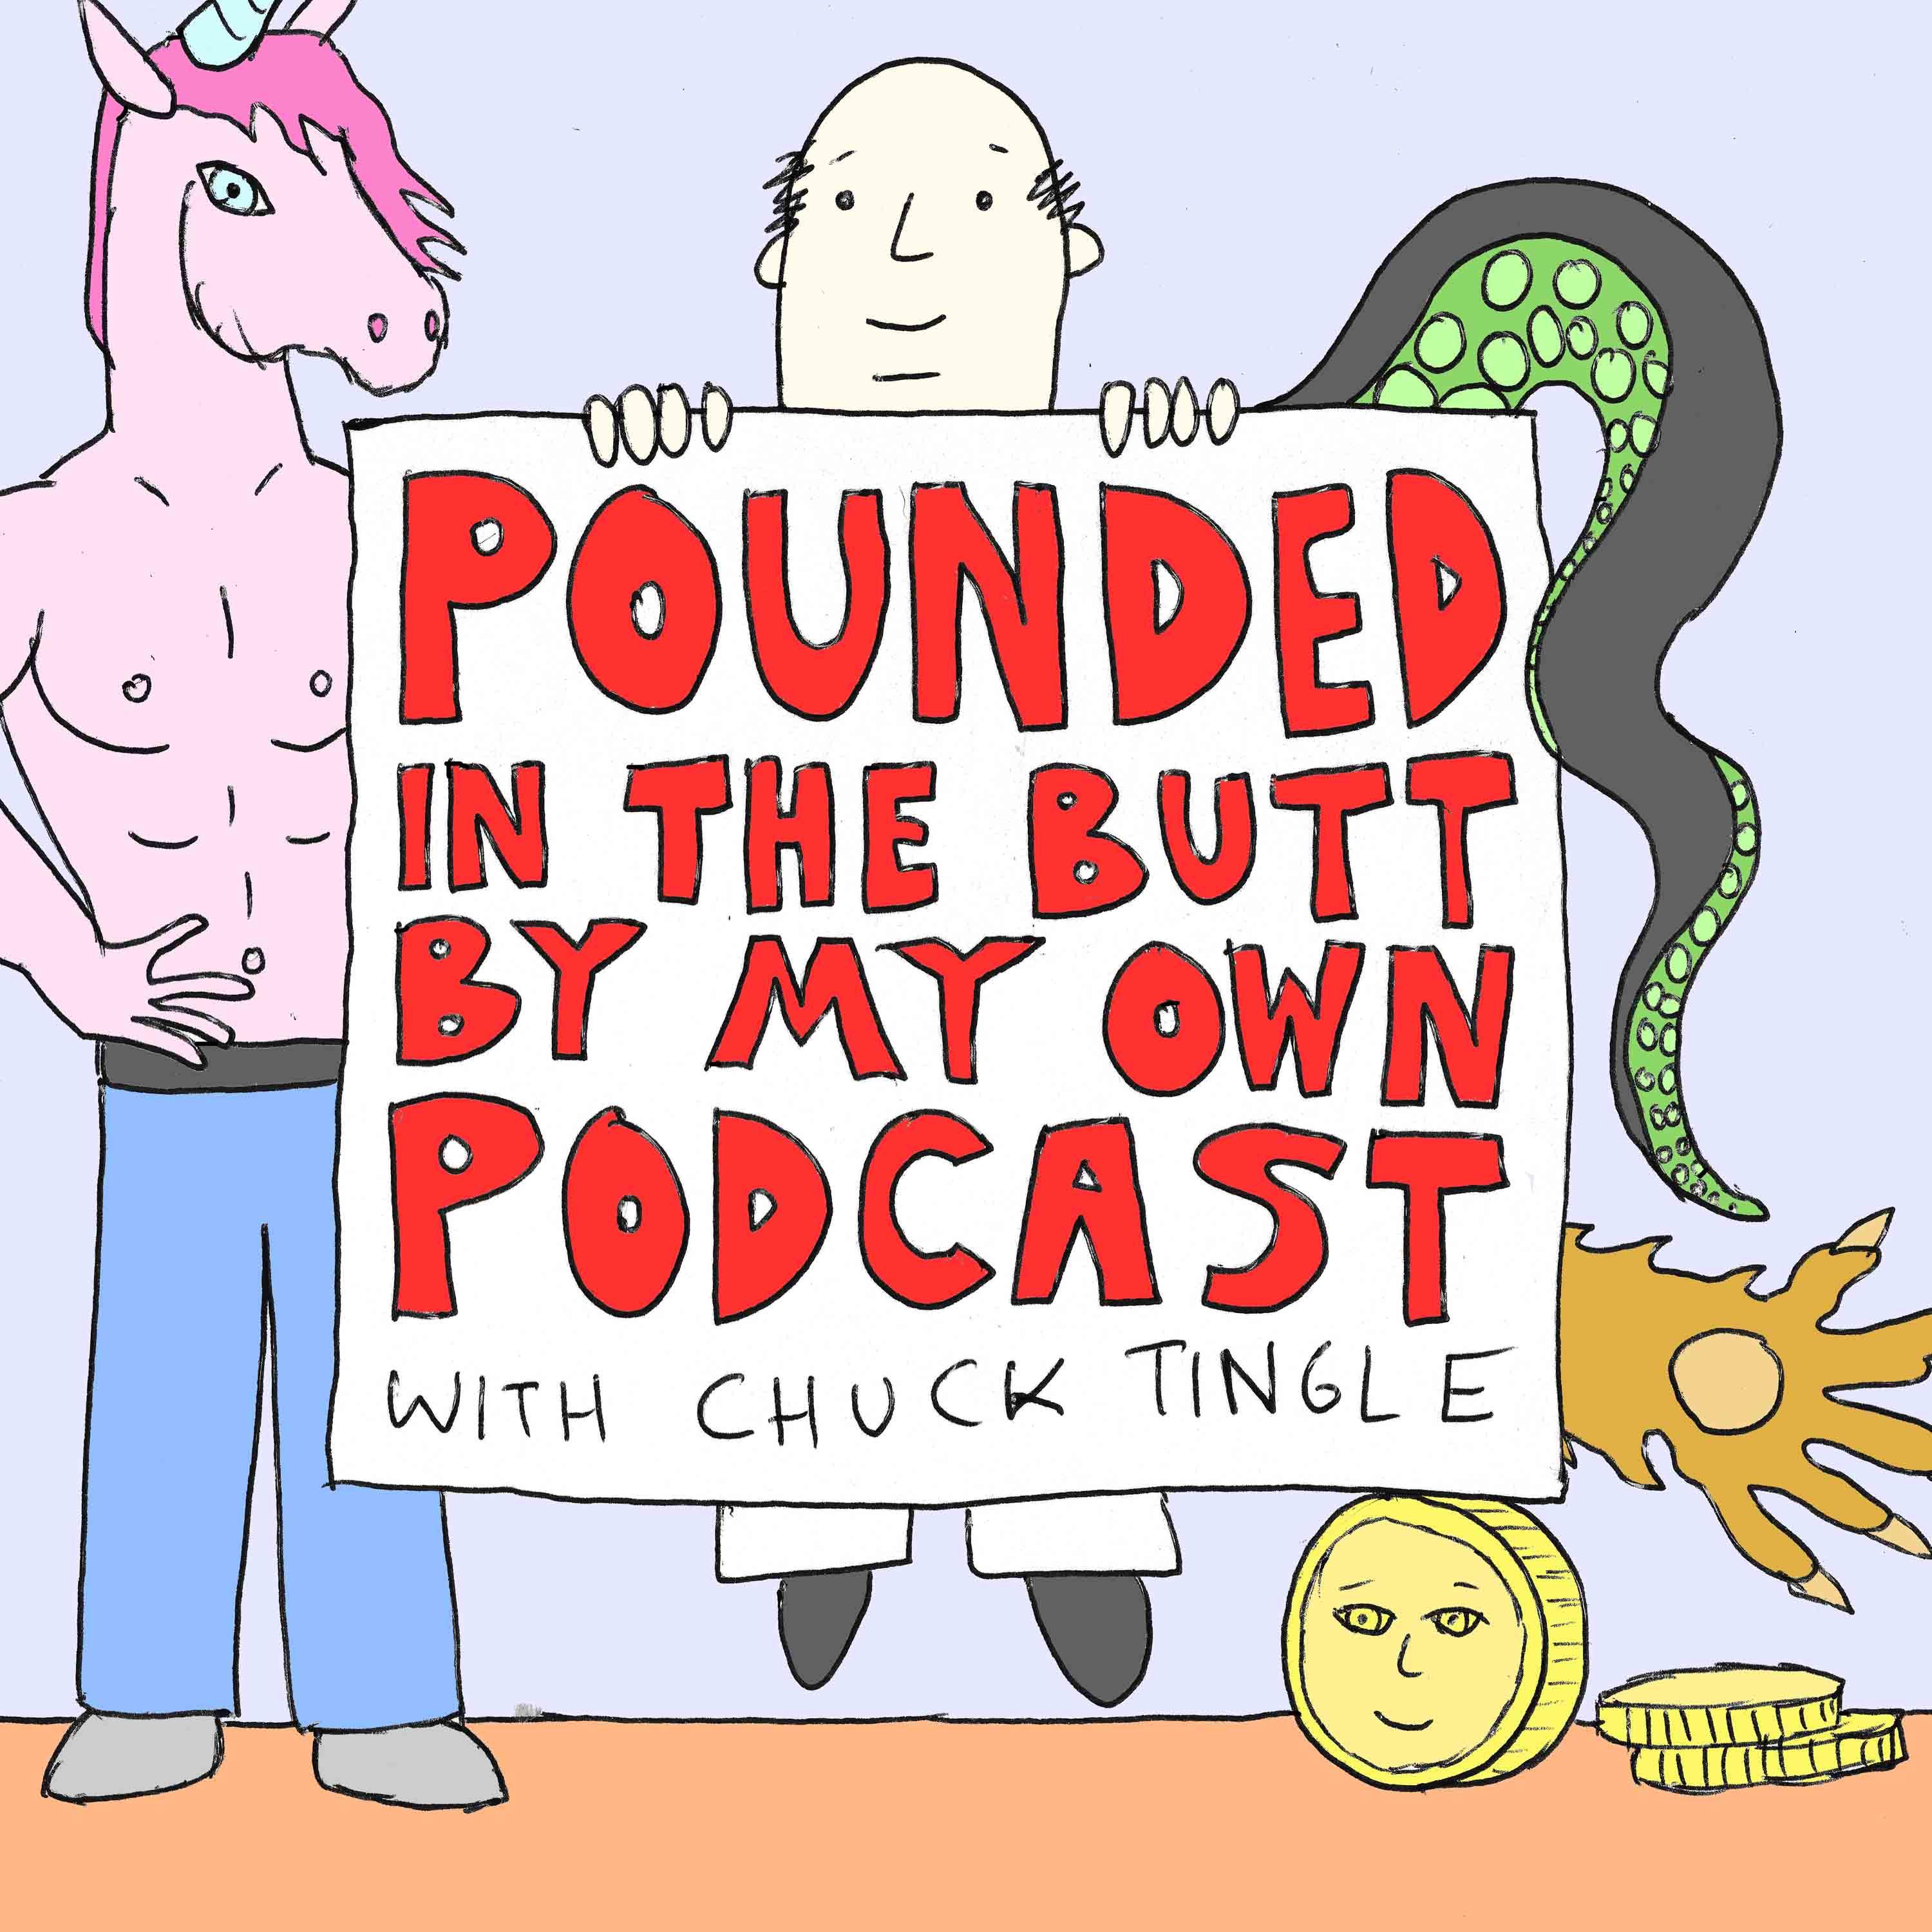 Thumbnail for "Pounded in the Butt by My Own Butt, read by Cecil Baldwin".